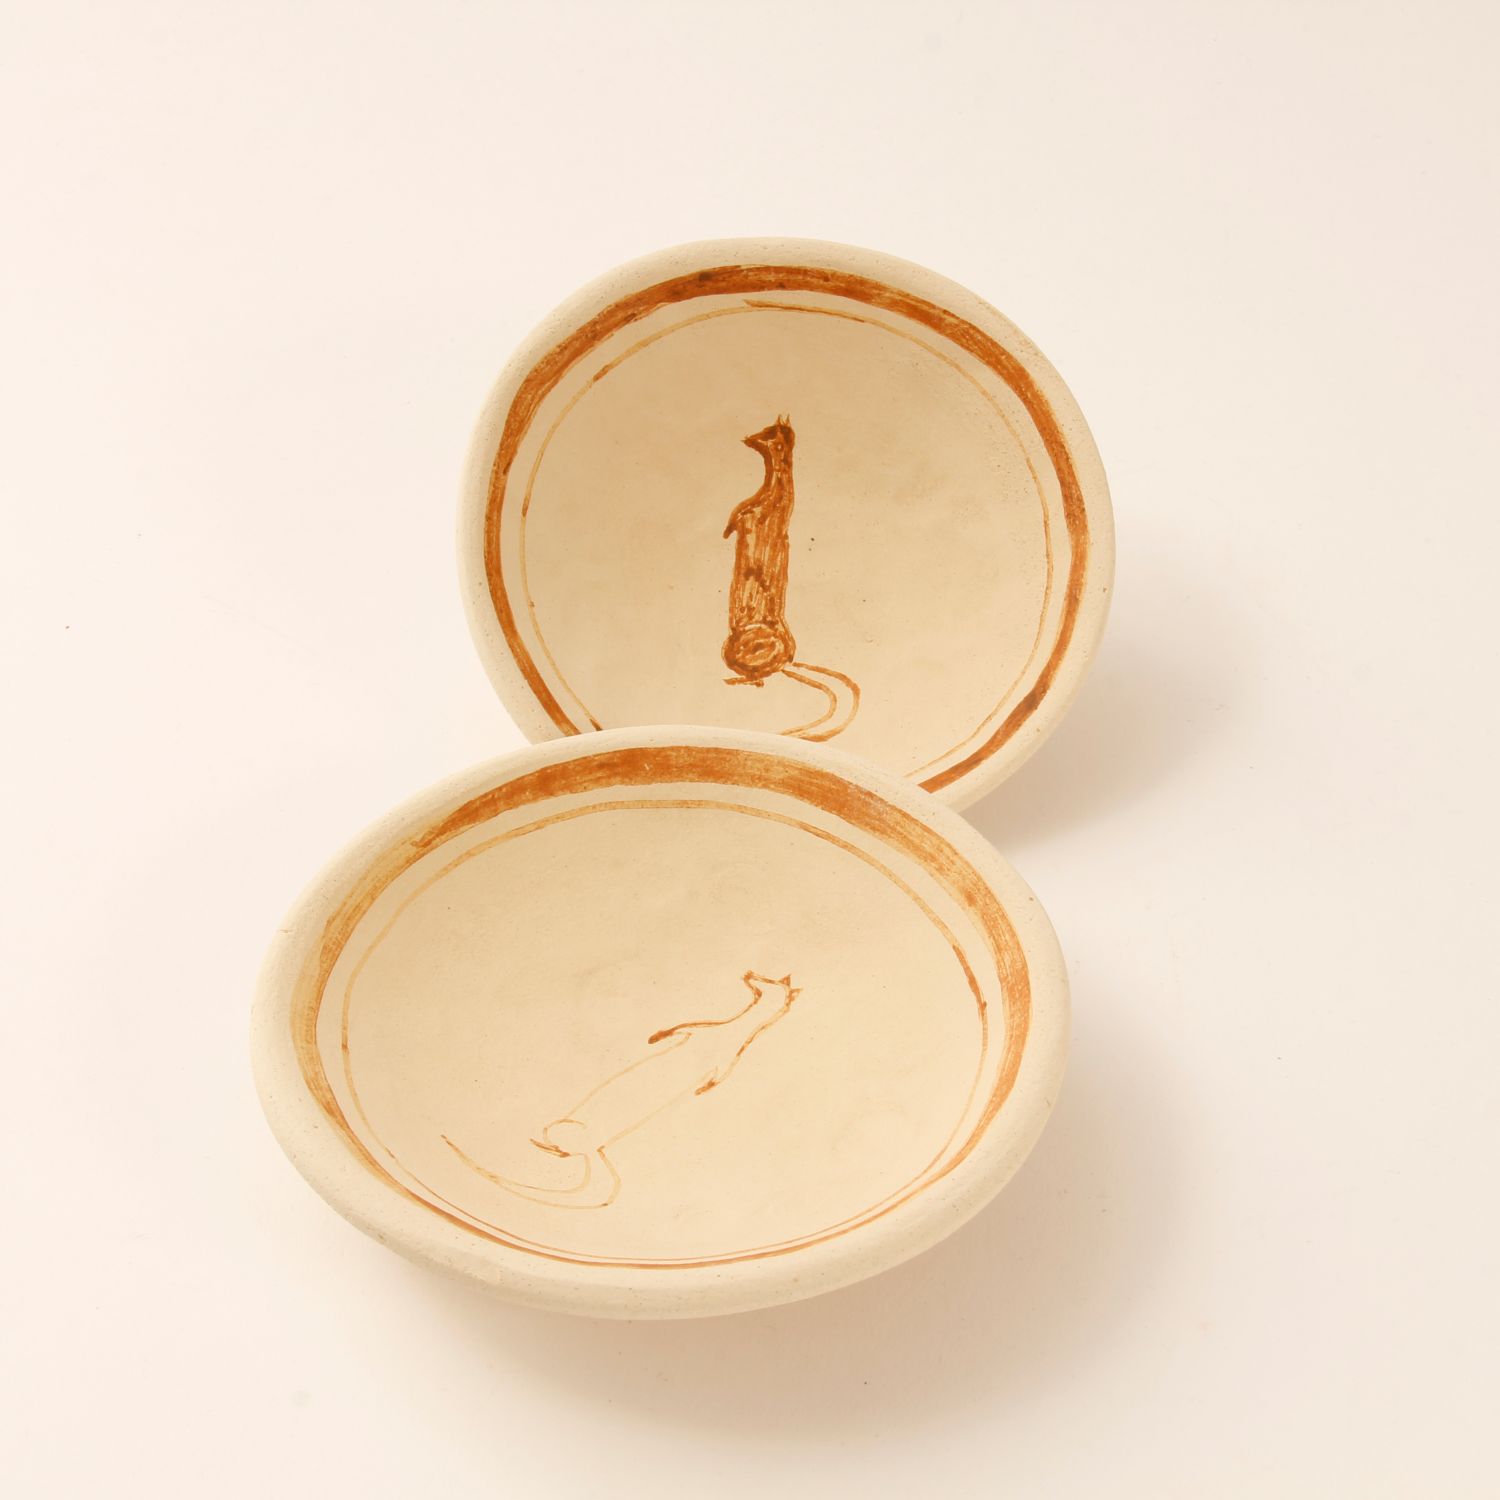 David Migwans: Assorted Weasel Bowl (Each sold separately) Product Image 1 of 2